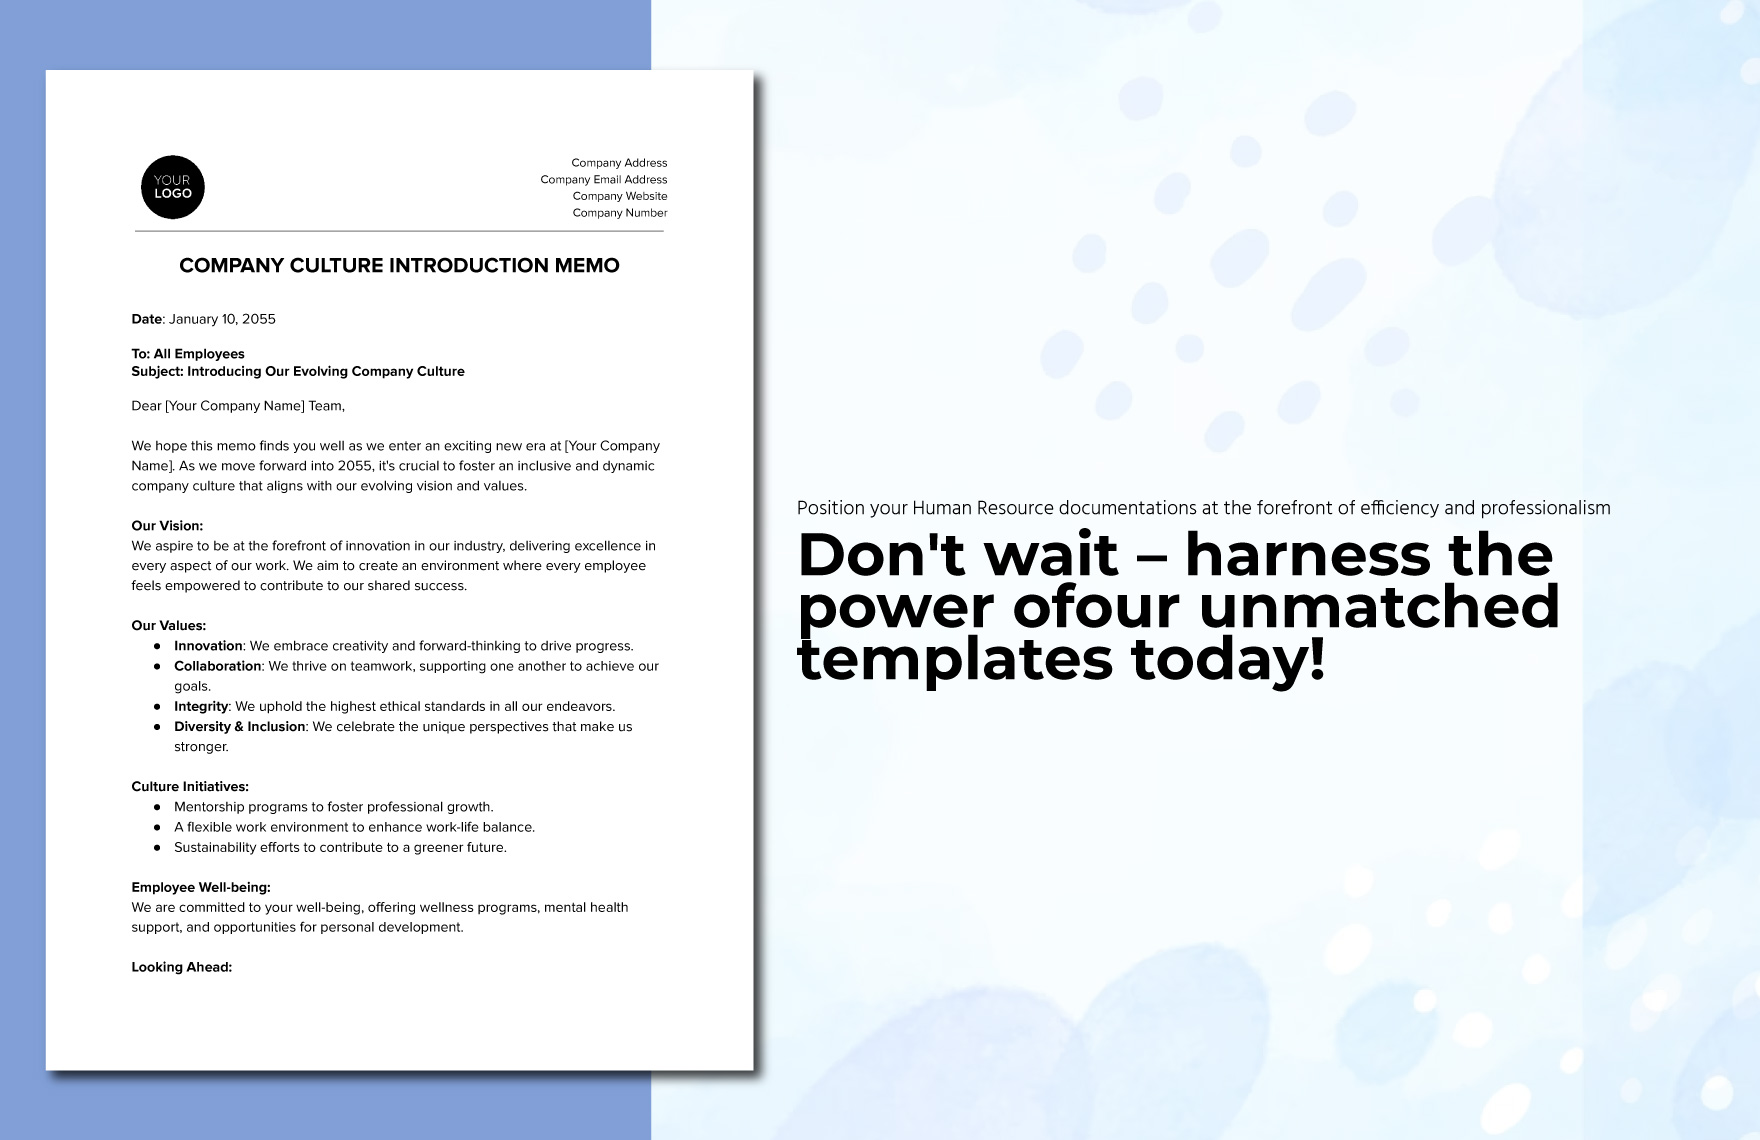 Company Culture Introduction Memo HR Template